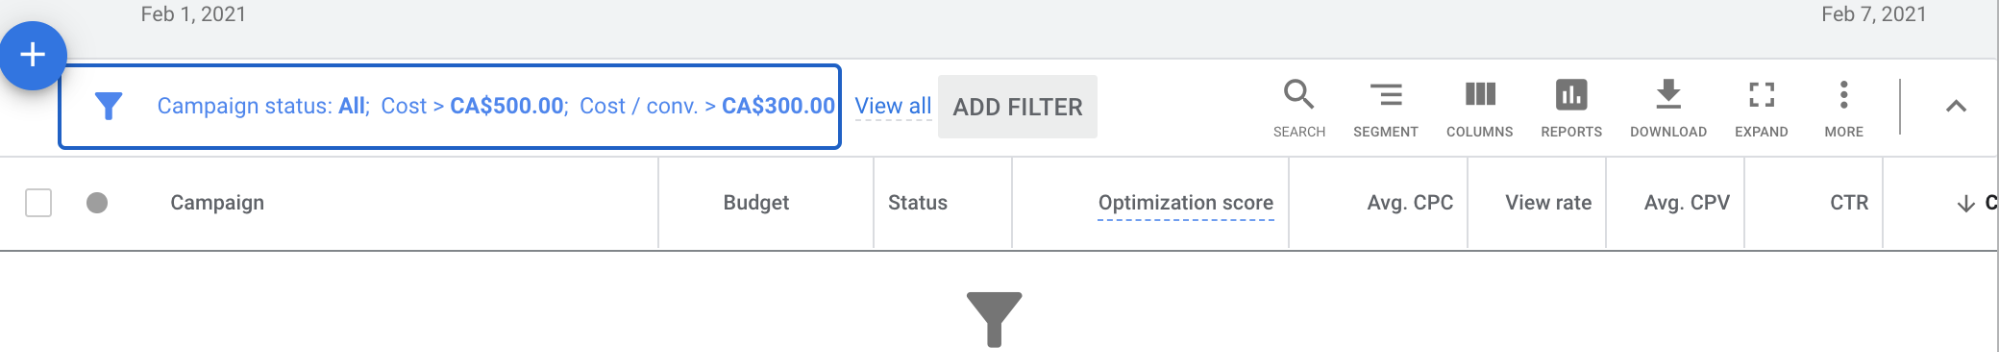 Setting Up Filters for Google Ads Script